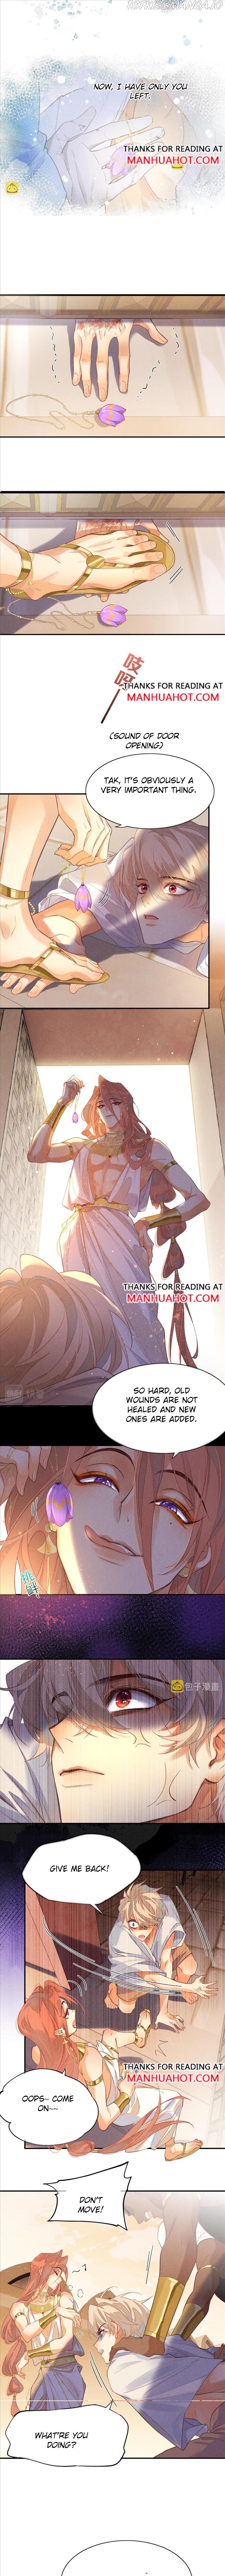 See You, My King chapter 6